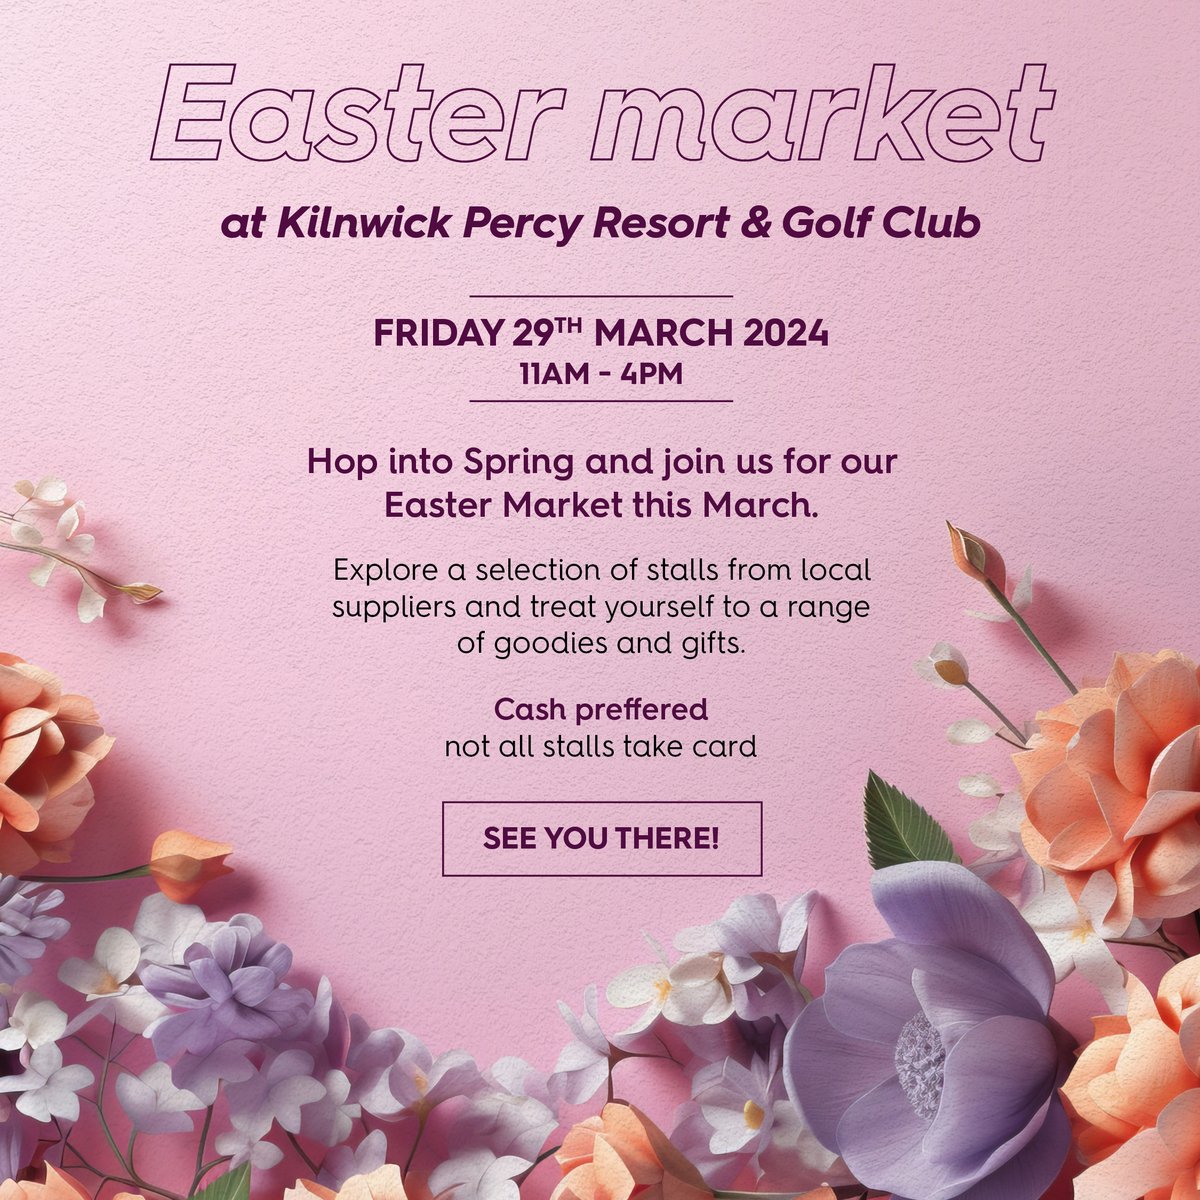 Our Easter Market takes place at Kilnwick Percy Resort & Golf Club on Friday 29th March 2024 between 11AM - 4PM. See more below ⤵️